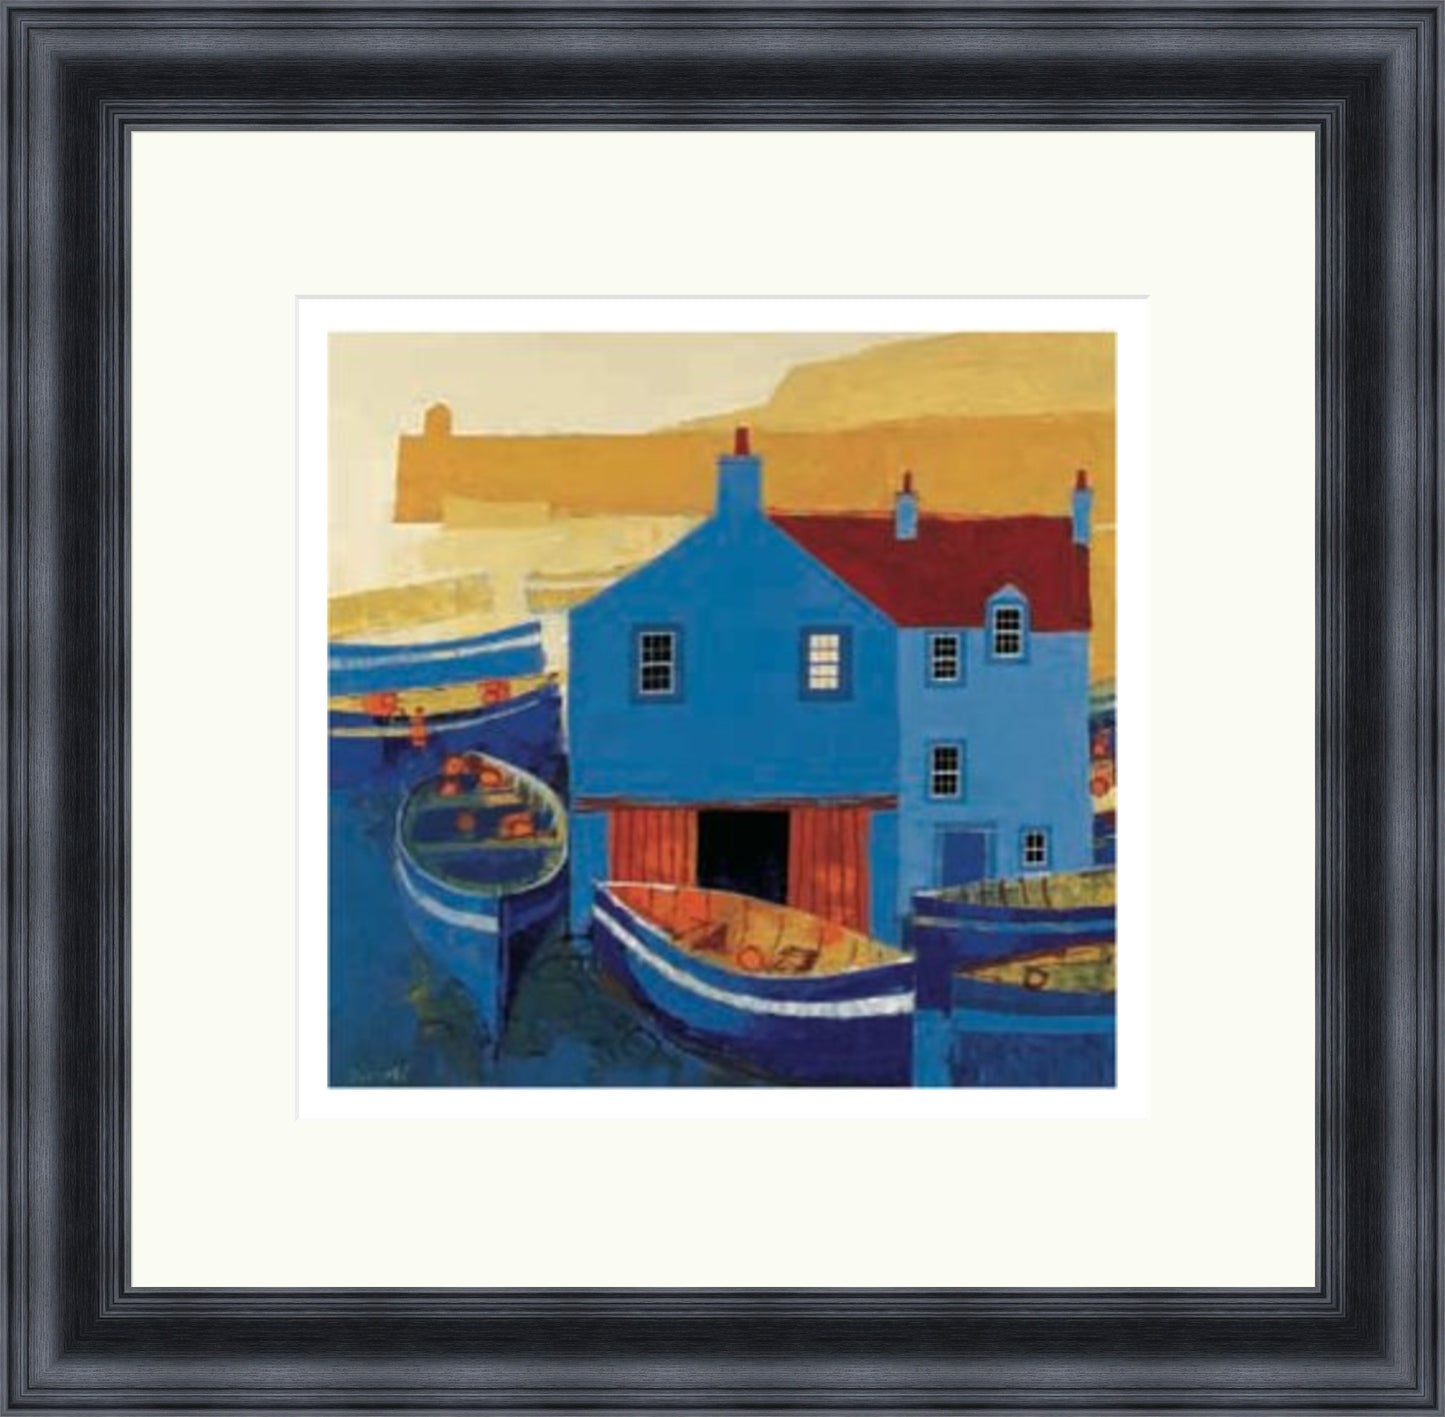 Early Morning (Limited Edition) by George Birrell